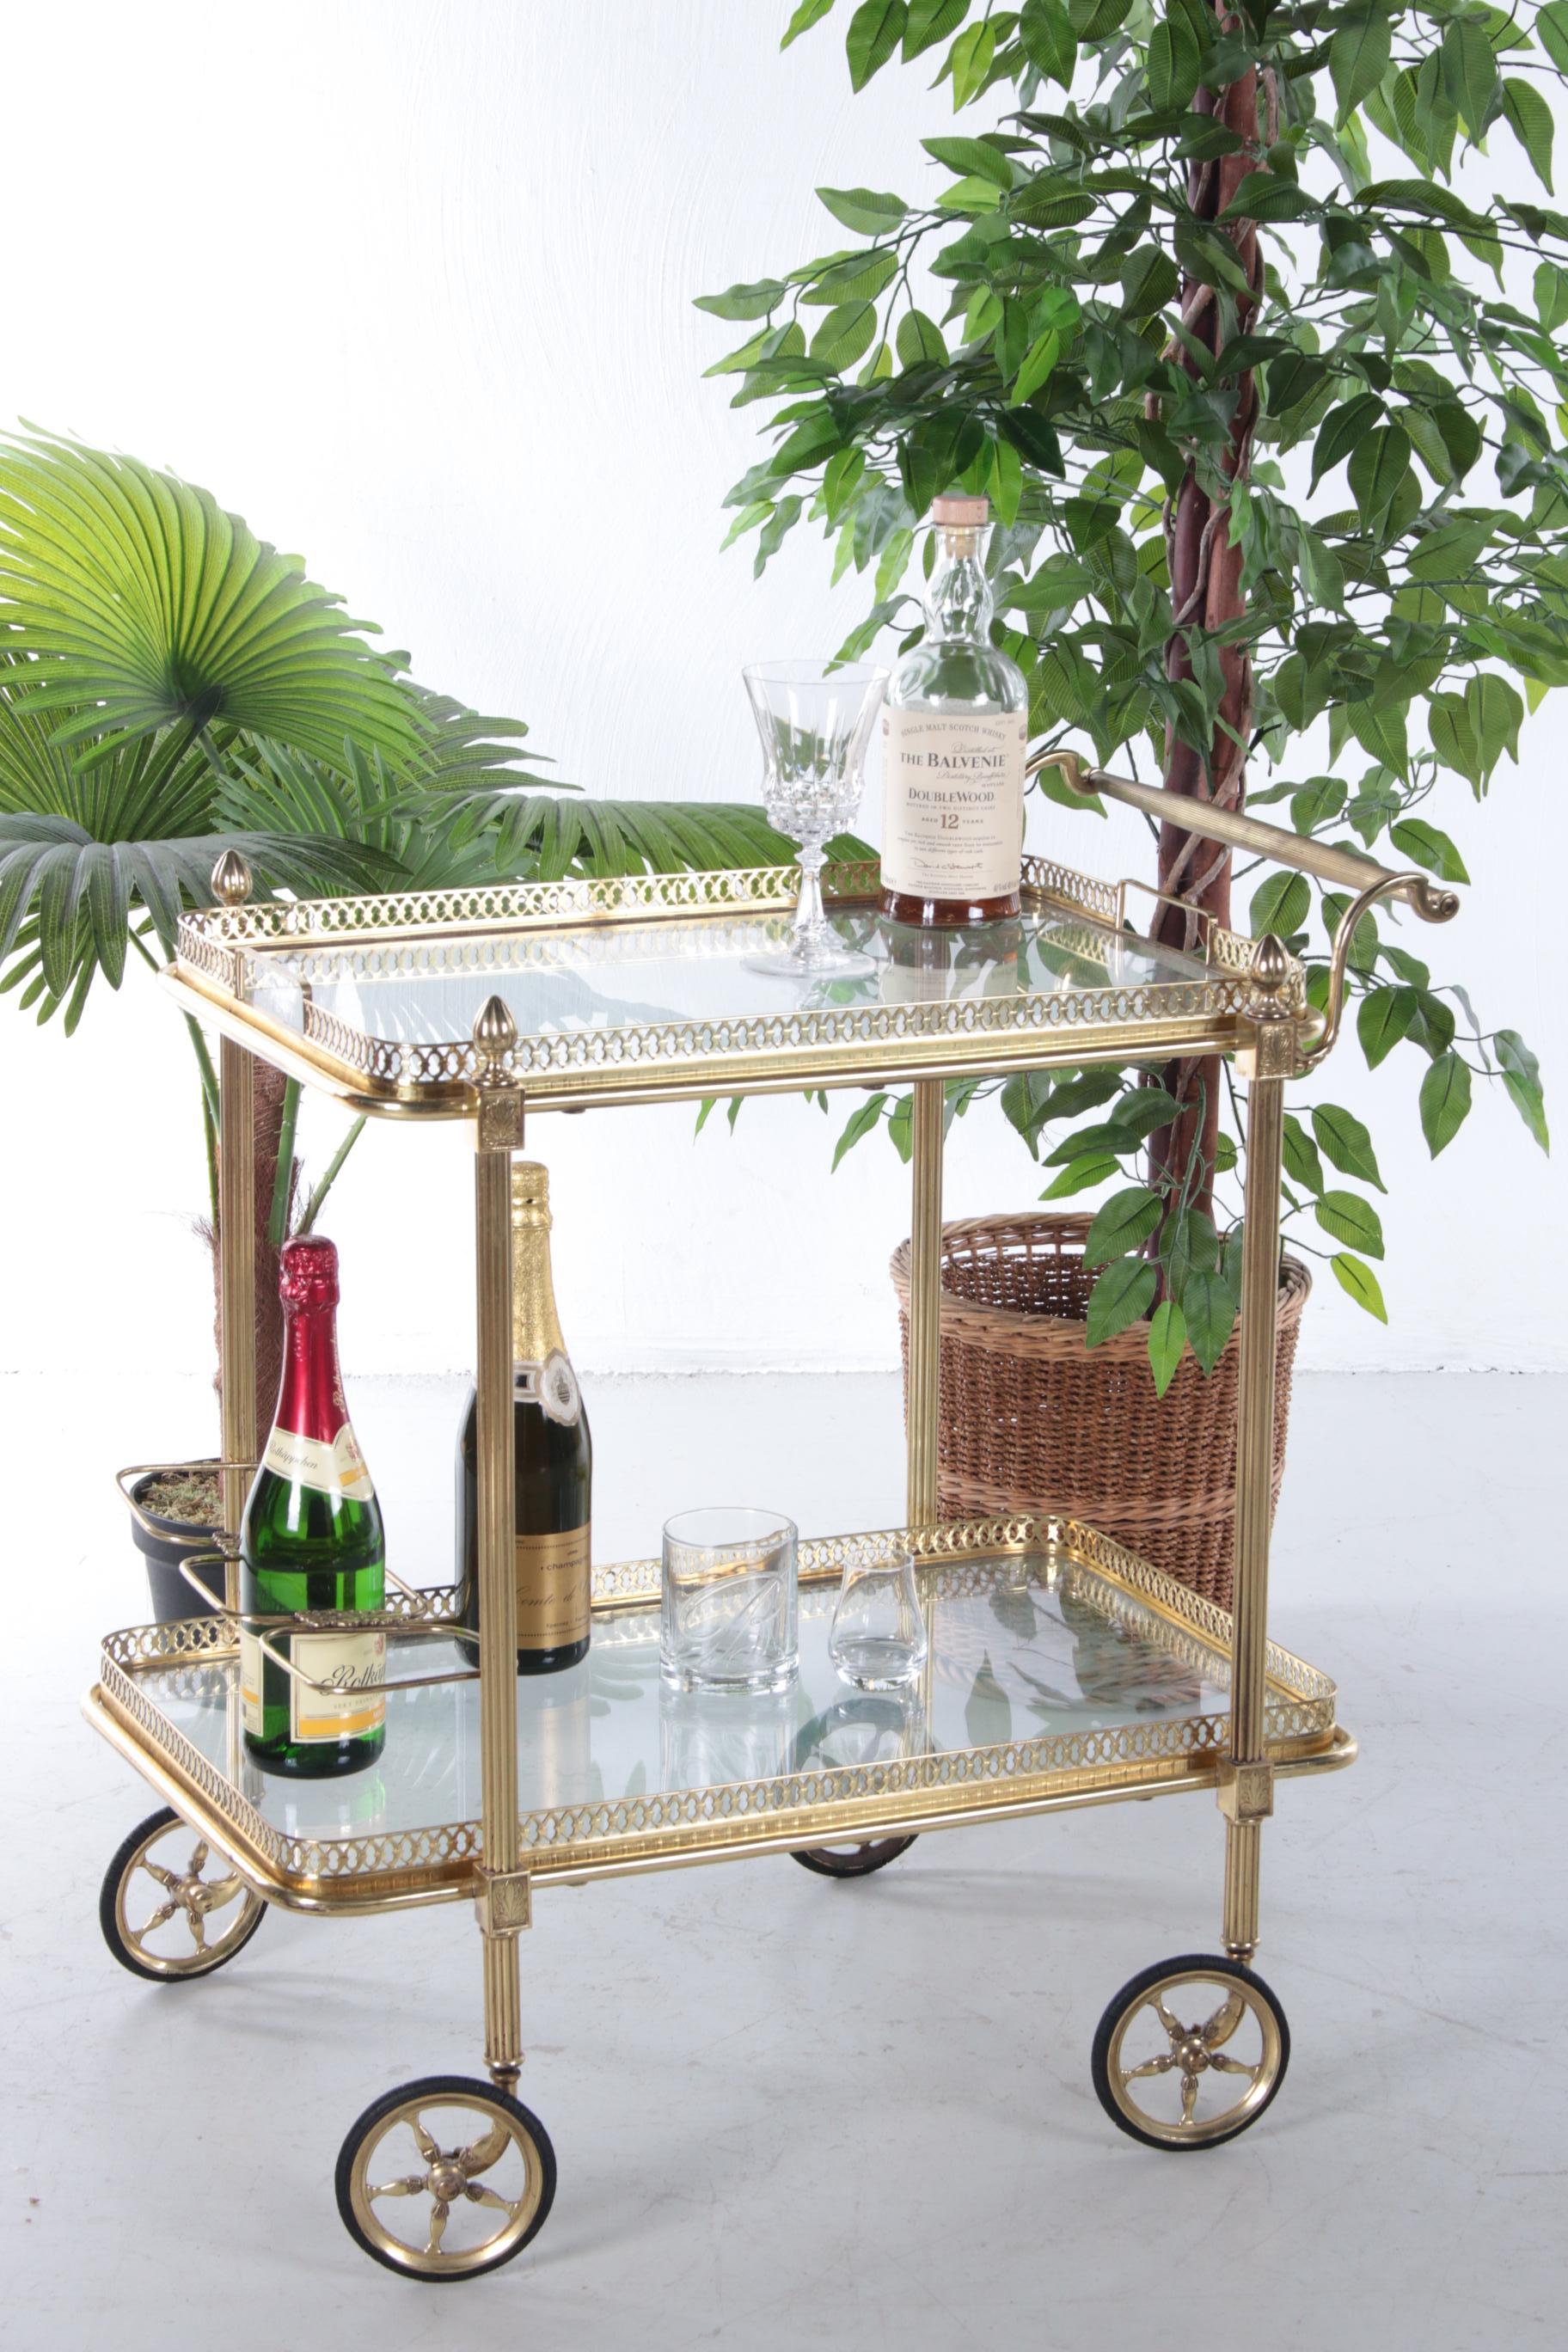 Maison Jansen Hollywood Regency trolley, 1960s


A beautiful Maison Jansen brass vintage trolley with two layers. Nice elongated shape with a brass frame and glass plates. The top tray is removable and can also be used as a tray.

Maison Jansen